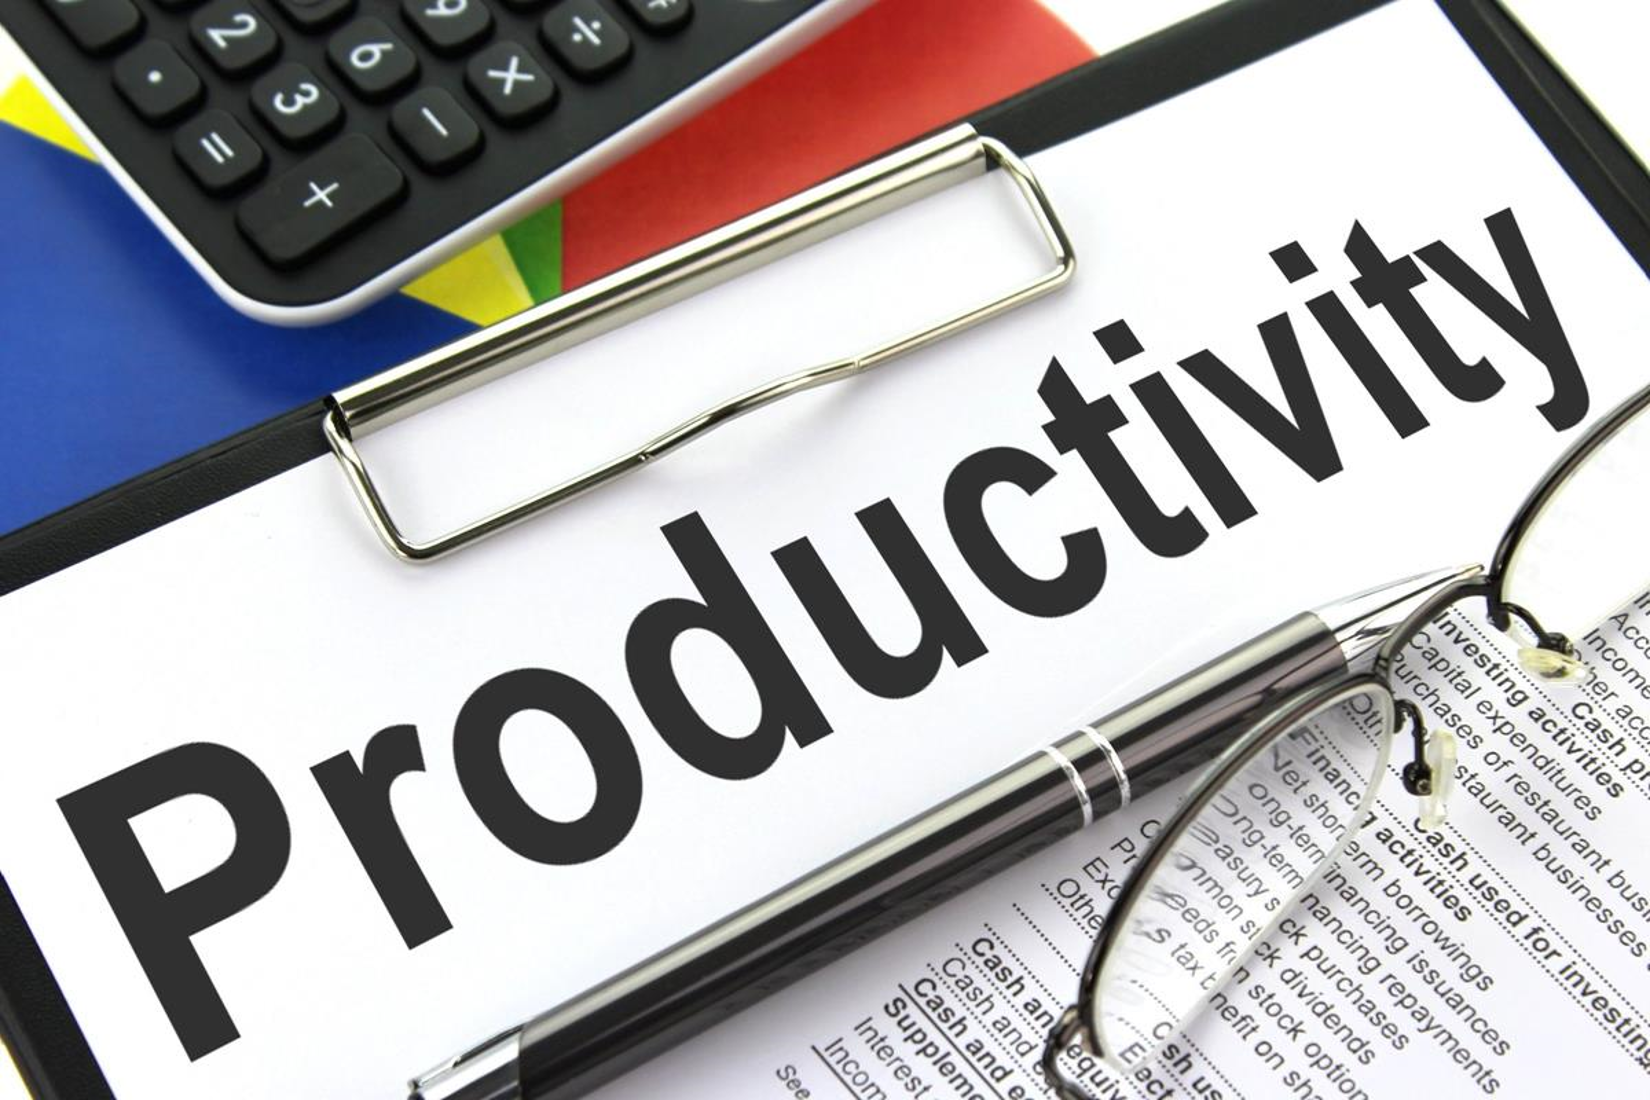 7 Steps to Being More Productive